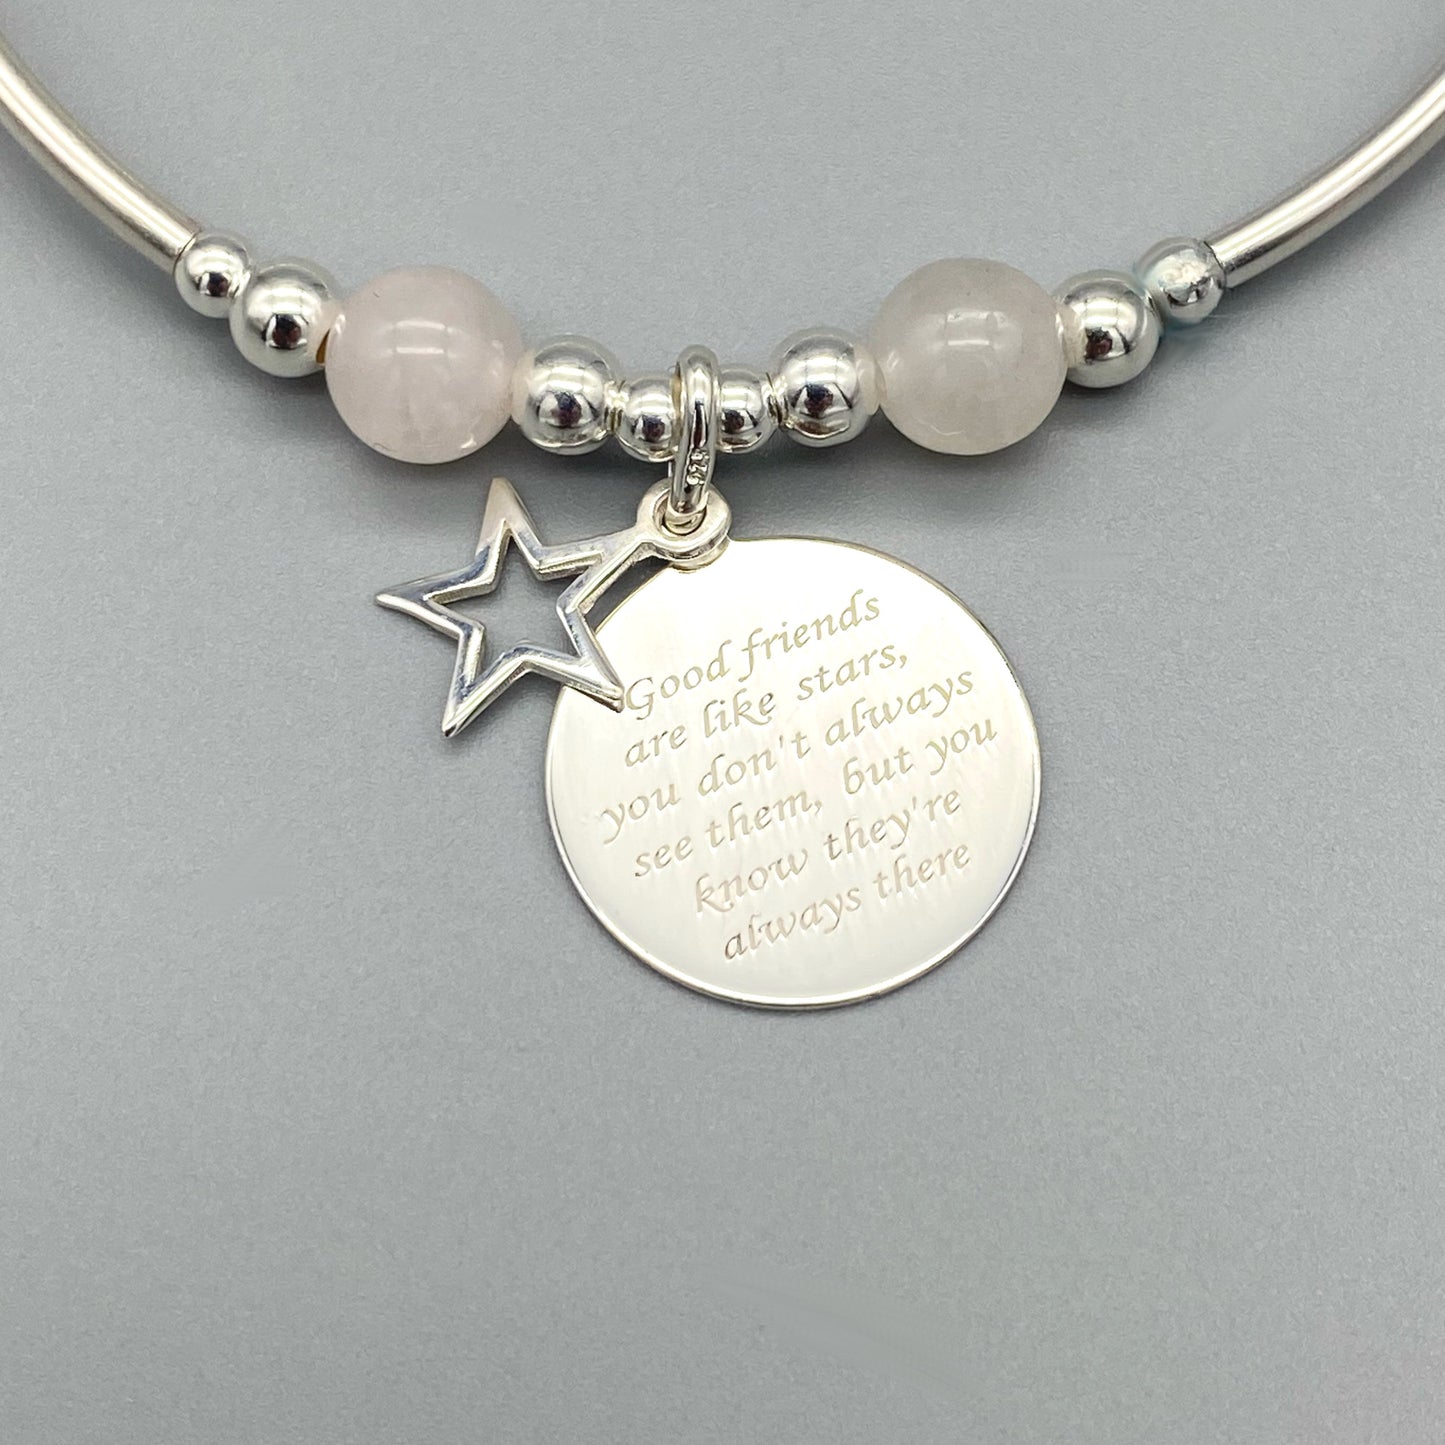 Closeup of "Friends are like stars..." charm rose quartz & sterling silver women's stacking bracelet by My Silver Wish